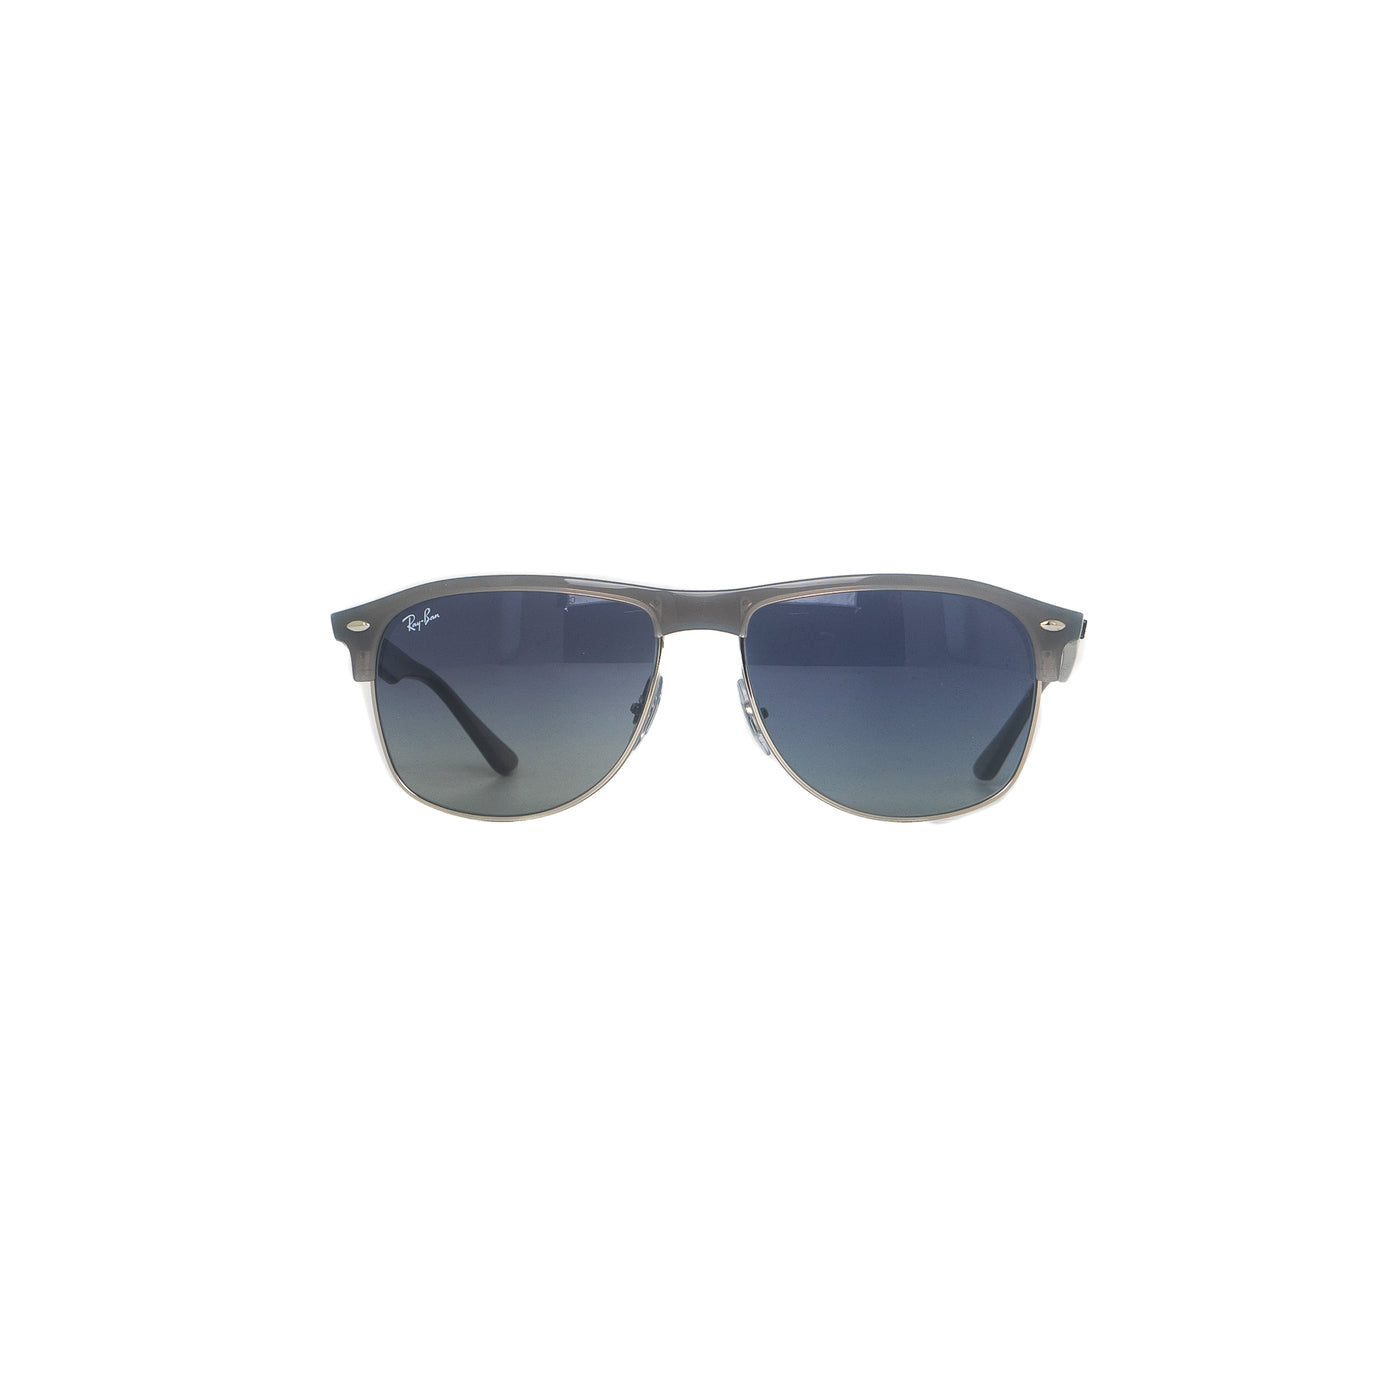 Ray-Ban Highstreet RB4342/6429/4L | Sunglasses - Vision Express Optical Philippines